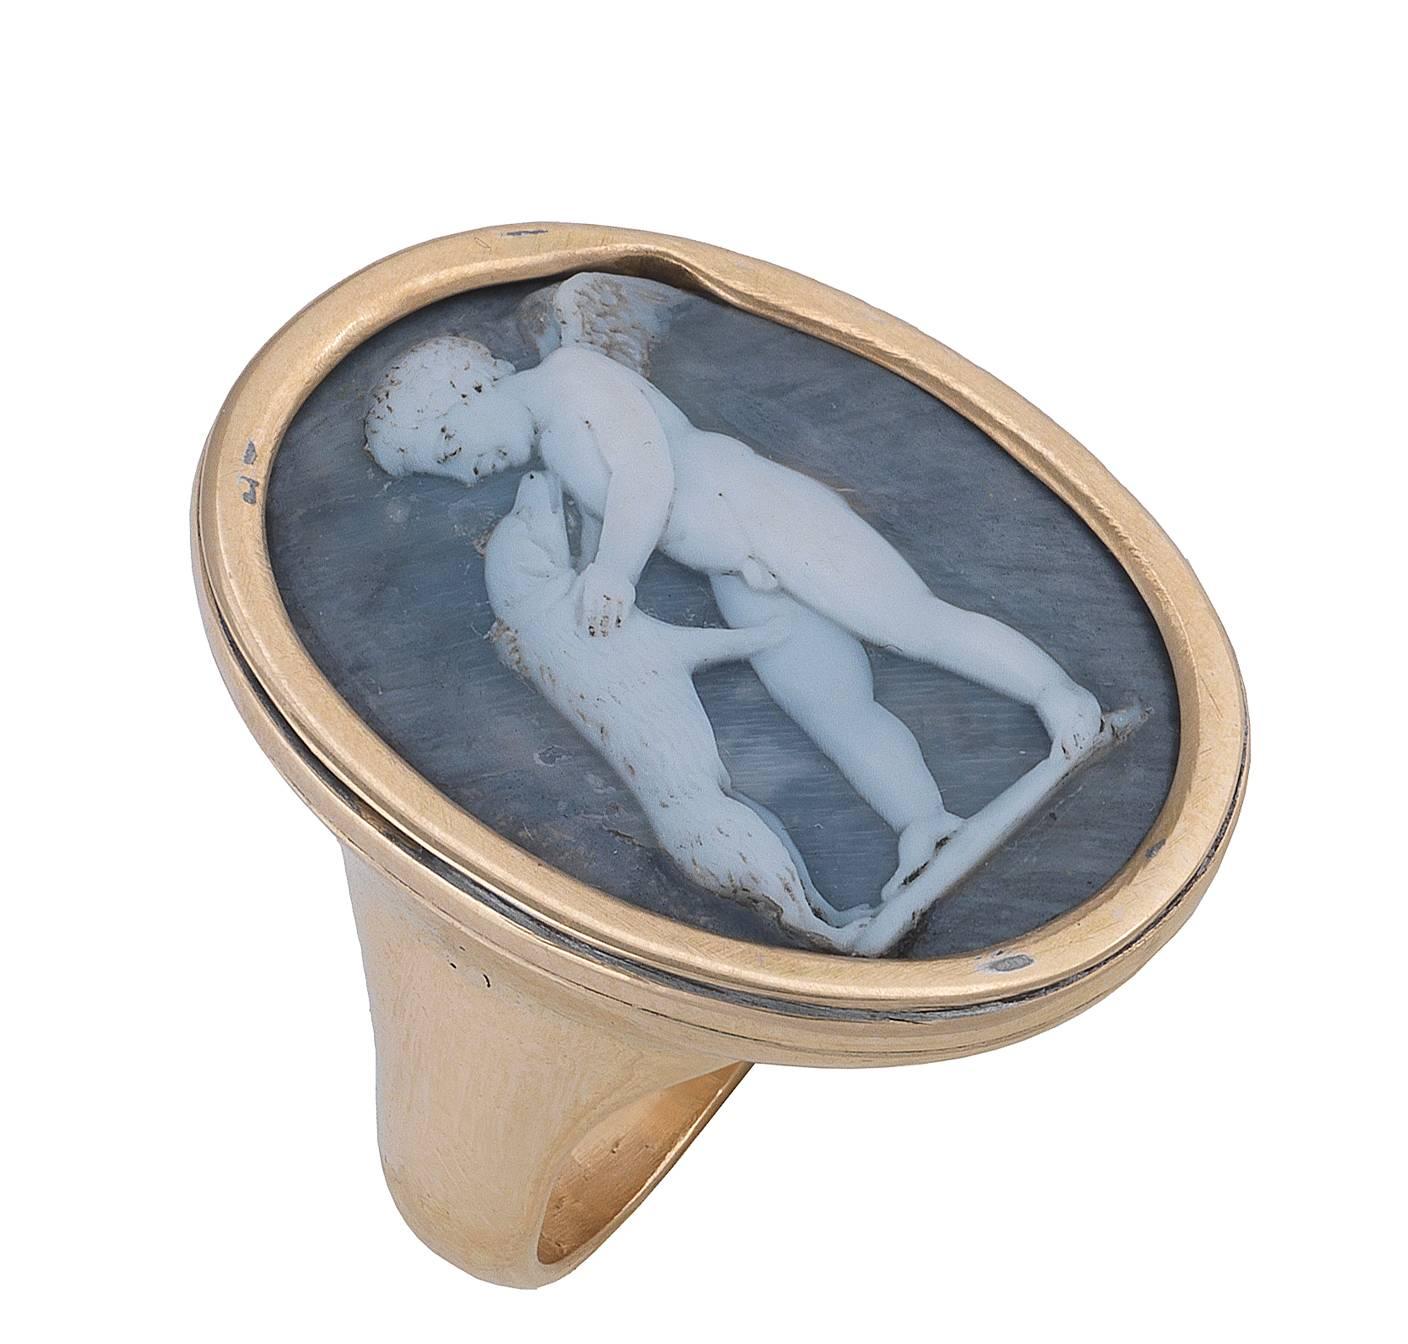 The oval  white on blue grey shell carved to depict the classic scene of a winged Cupid playing with a dog.

Later 18Kt yellow gold mounting

Size of the top: 30.8 mm high

Weight: 19.5 gr

Finger size: 10
